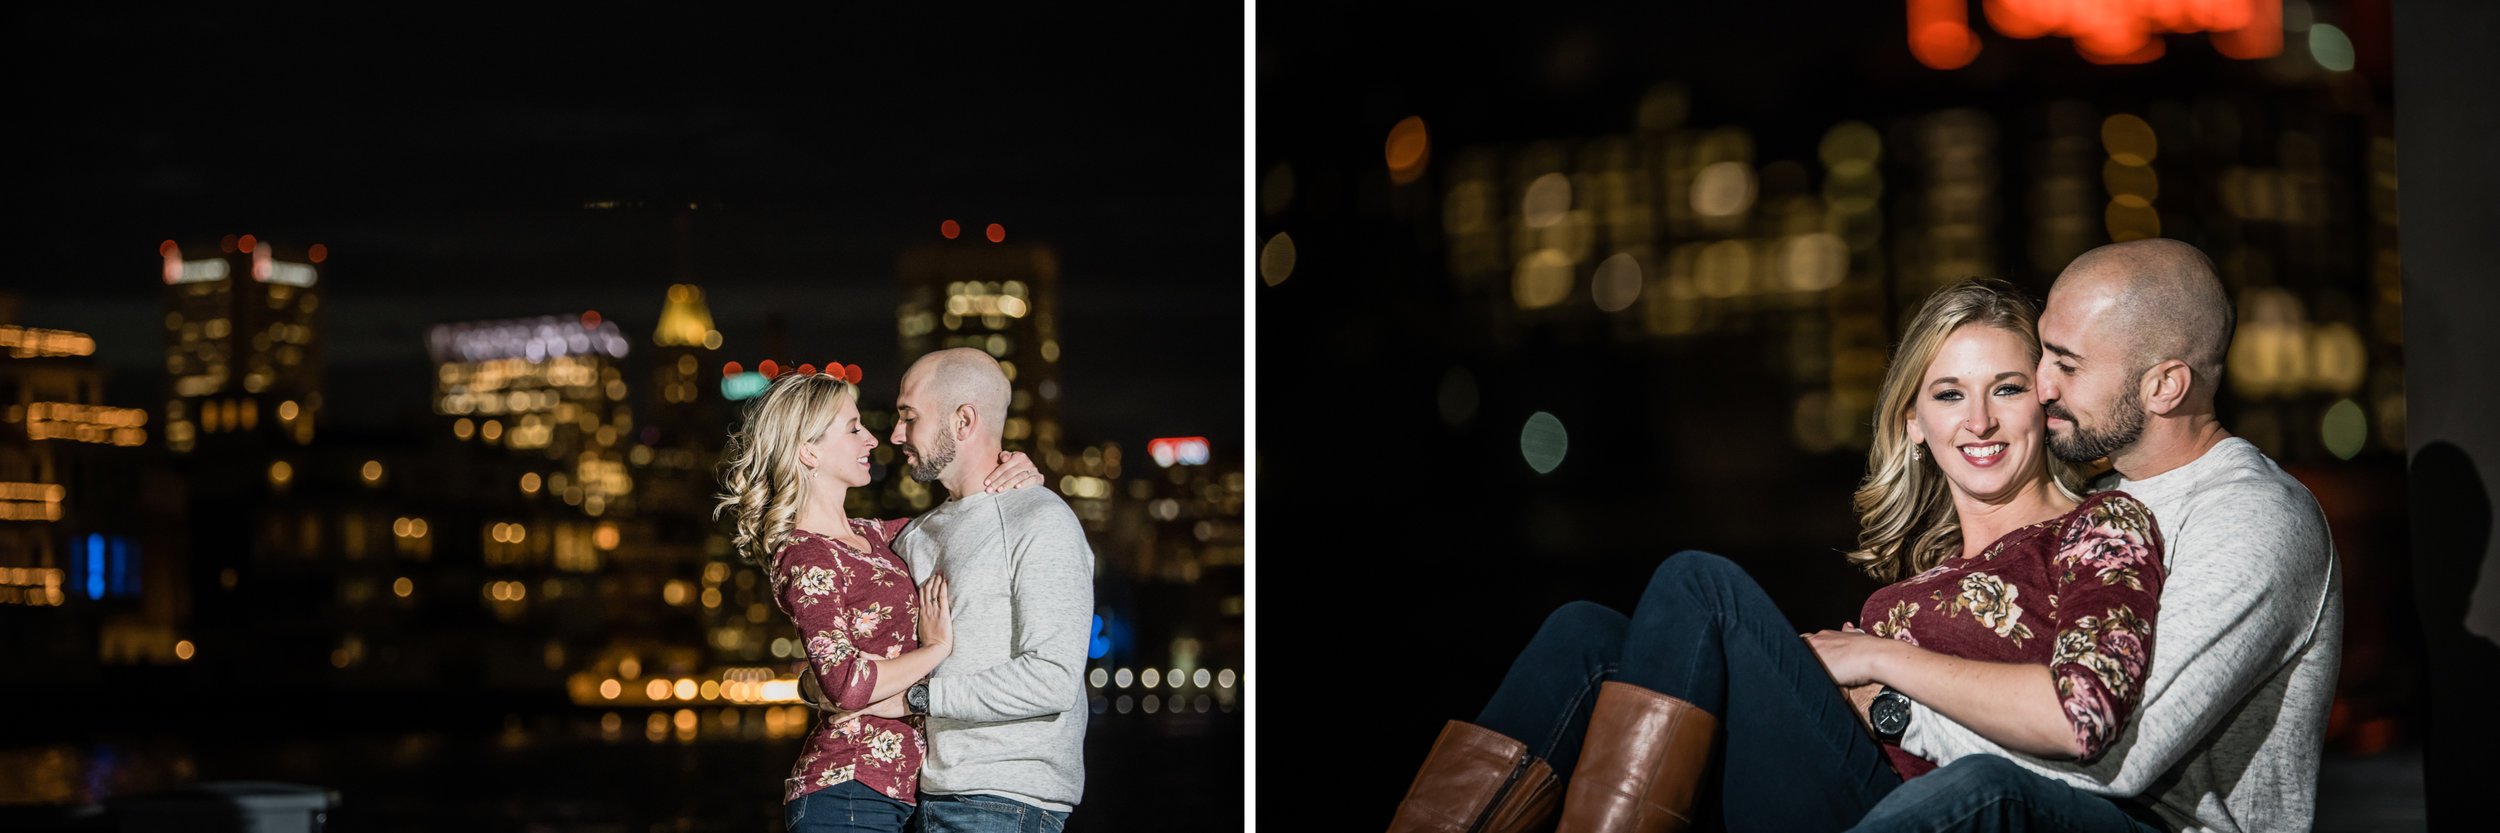 Engagement session in Baltimore